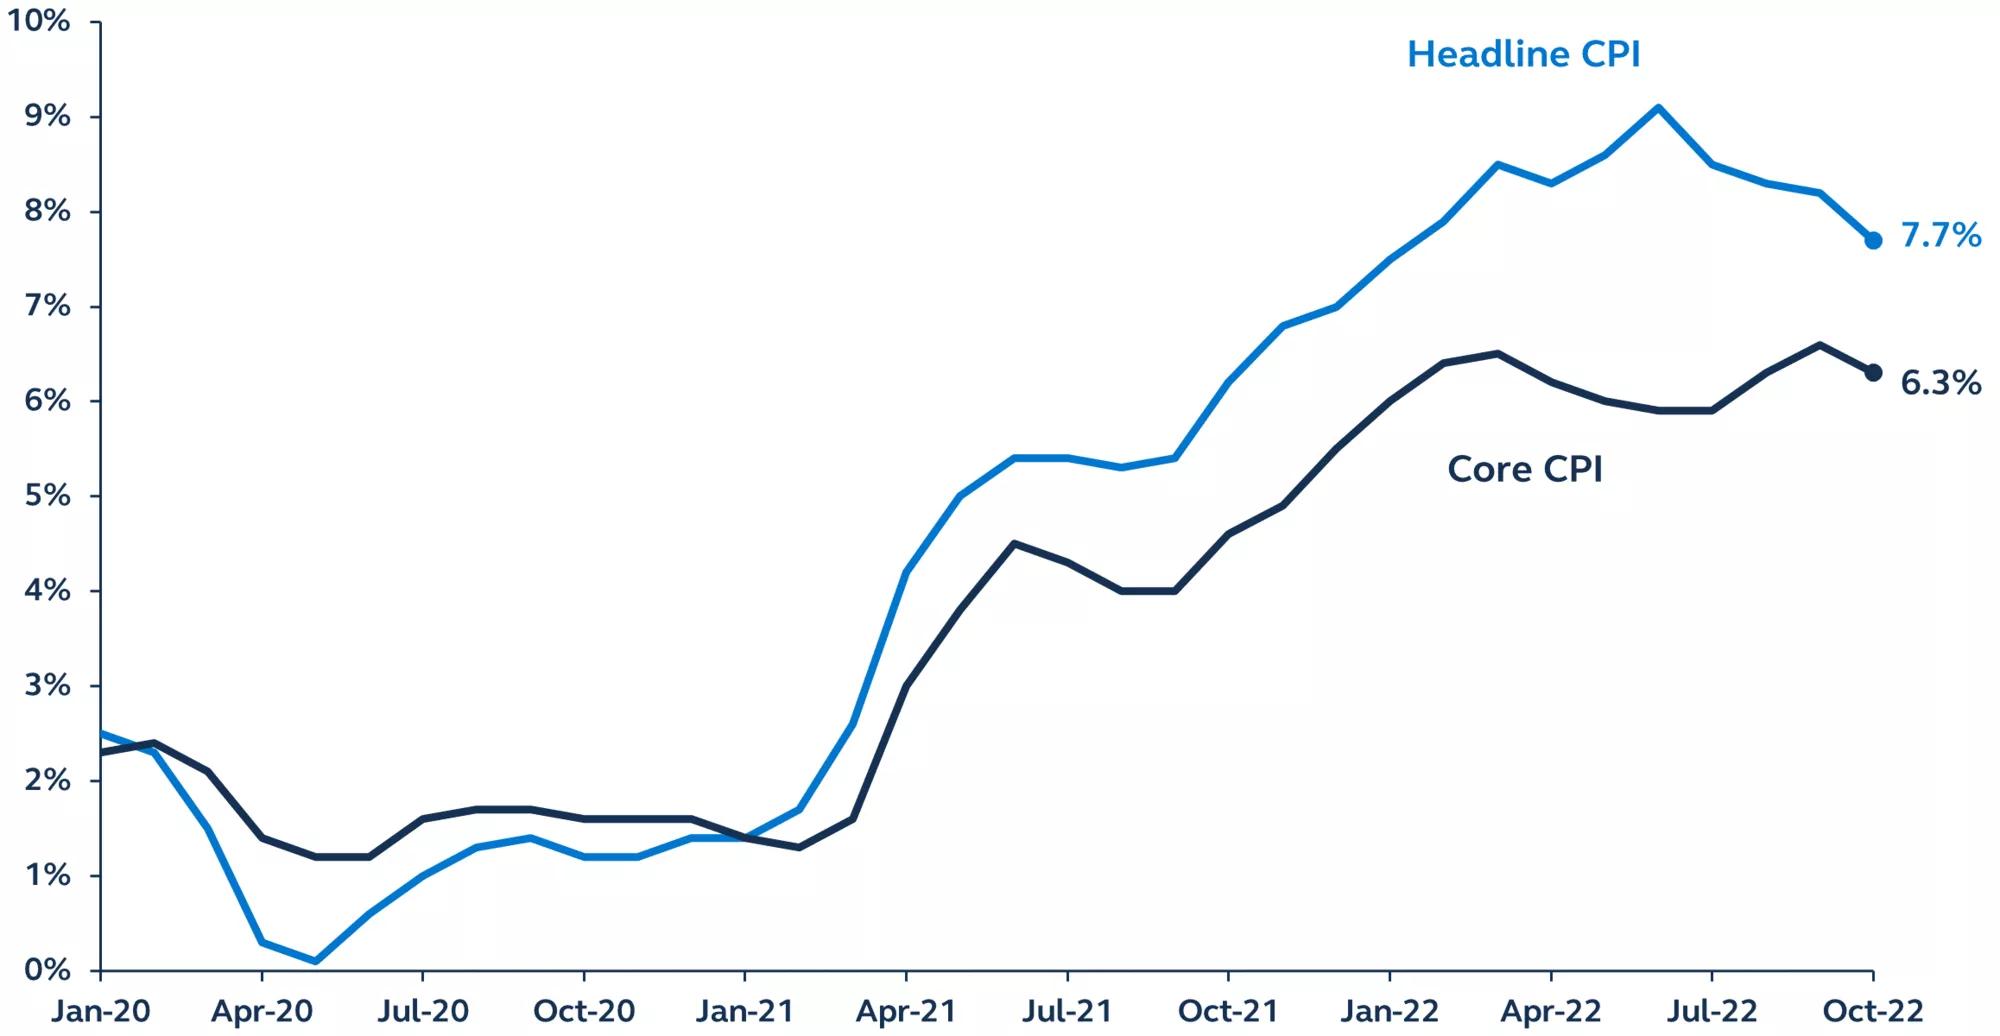 Line graph of year-over-year consumer price index inflation from Jan. 2020 - Nov. 2022, by headline and core CPI.